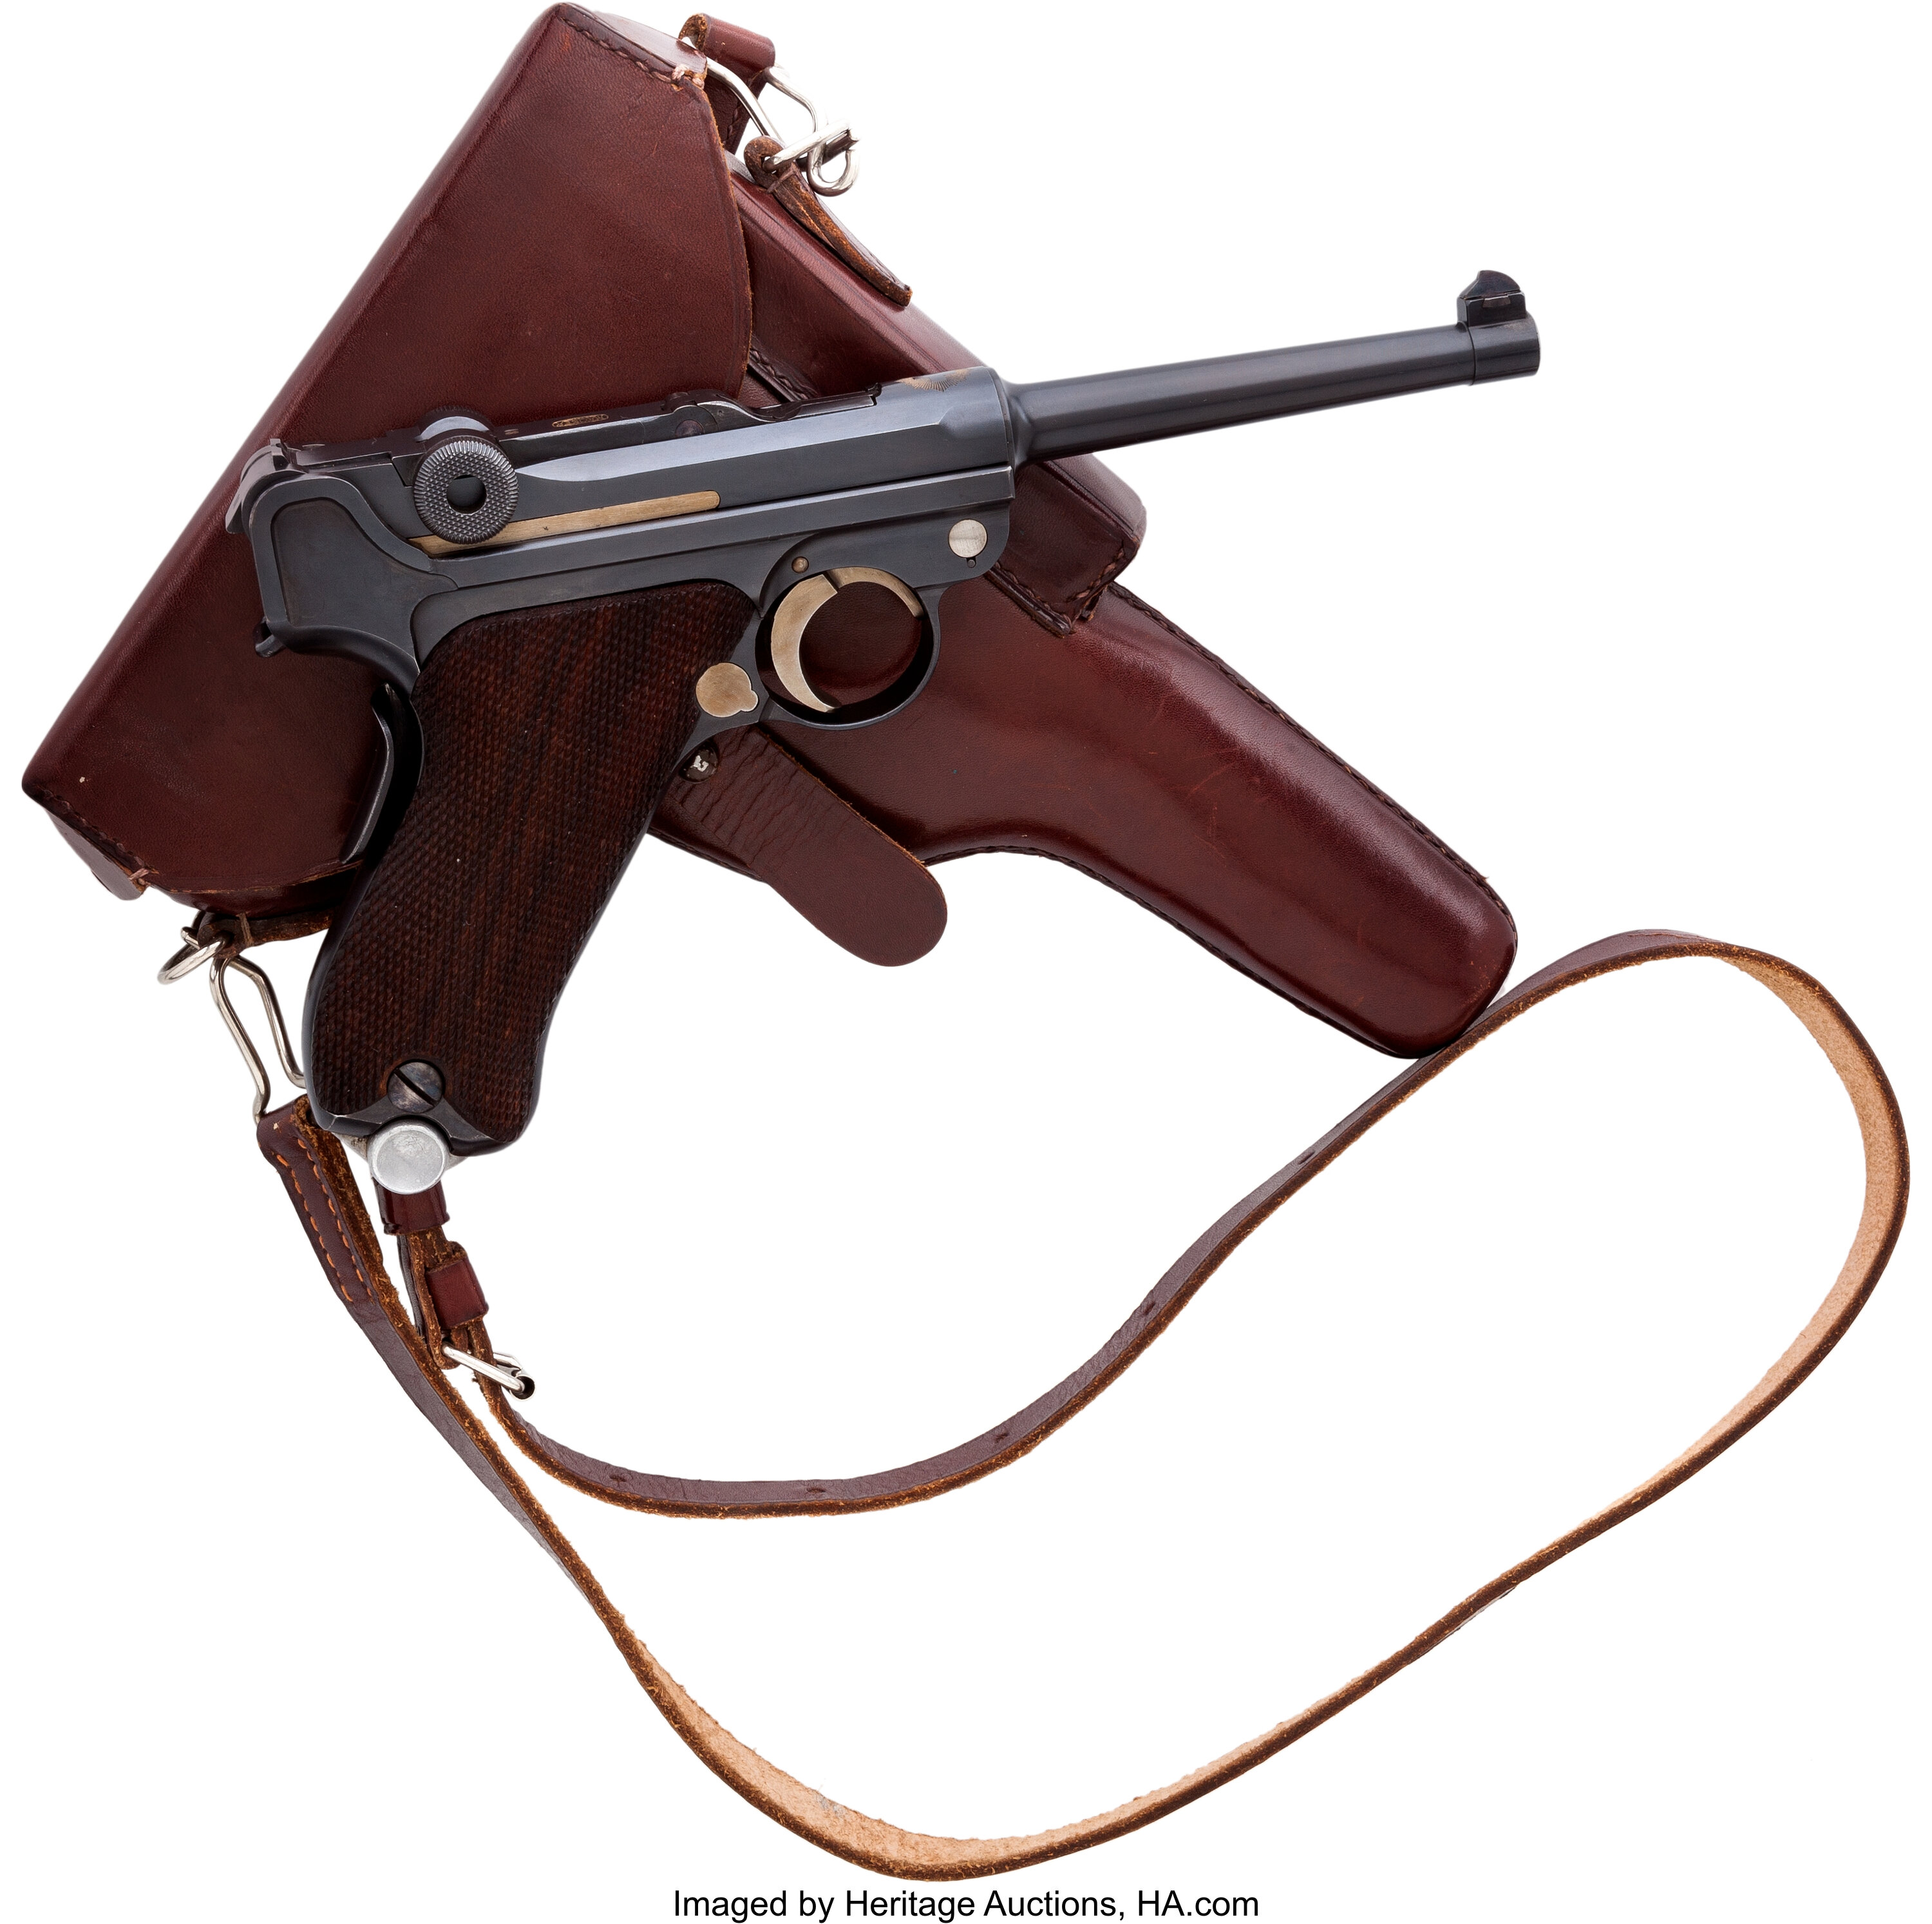 Swiss Mauser Model 1906 Luger Semi Automatic Pistol With Holster Lot 32595 Heritage Auctions 6098